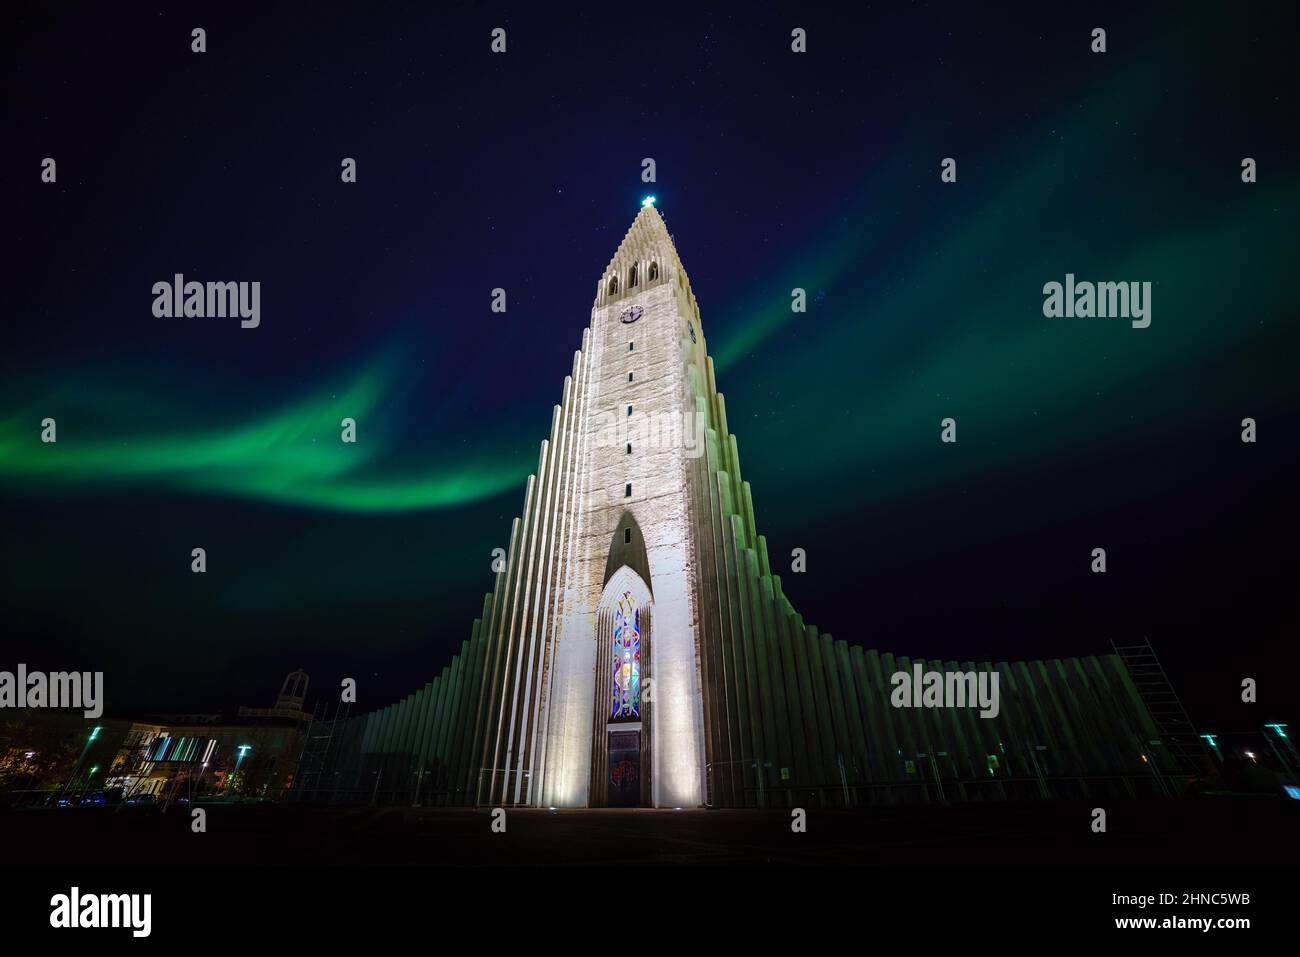 Northern lights shining over the church in Reykjavik Iceland Stock Photo